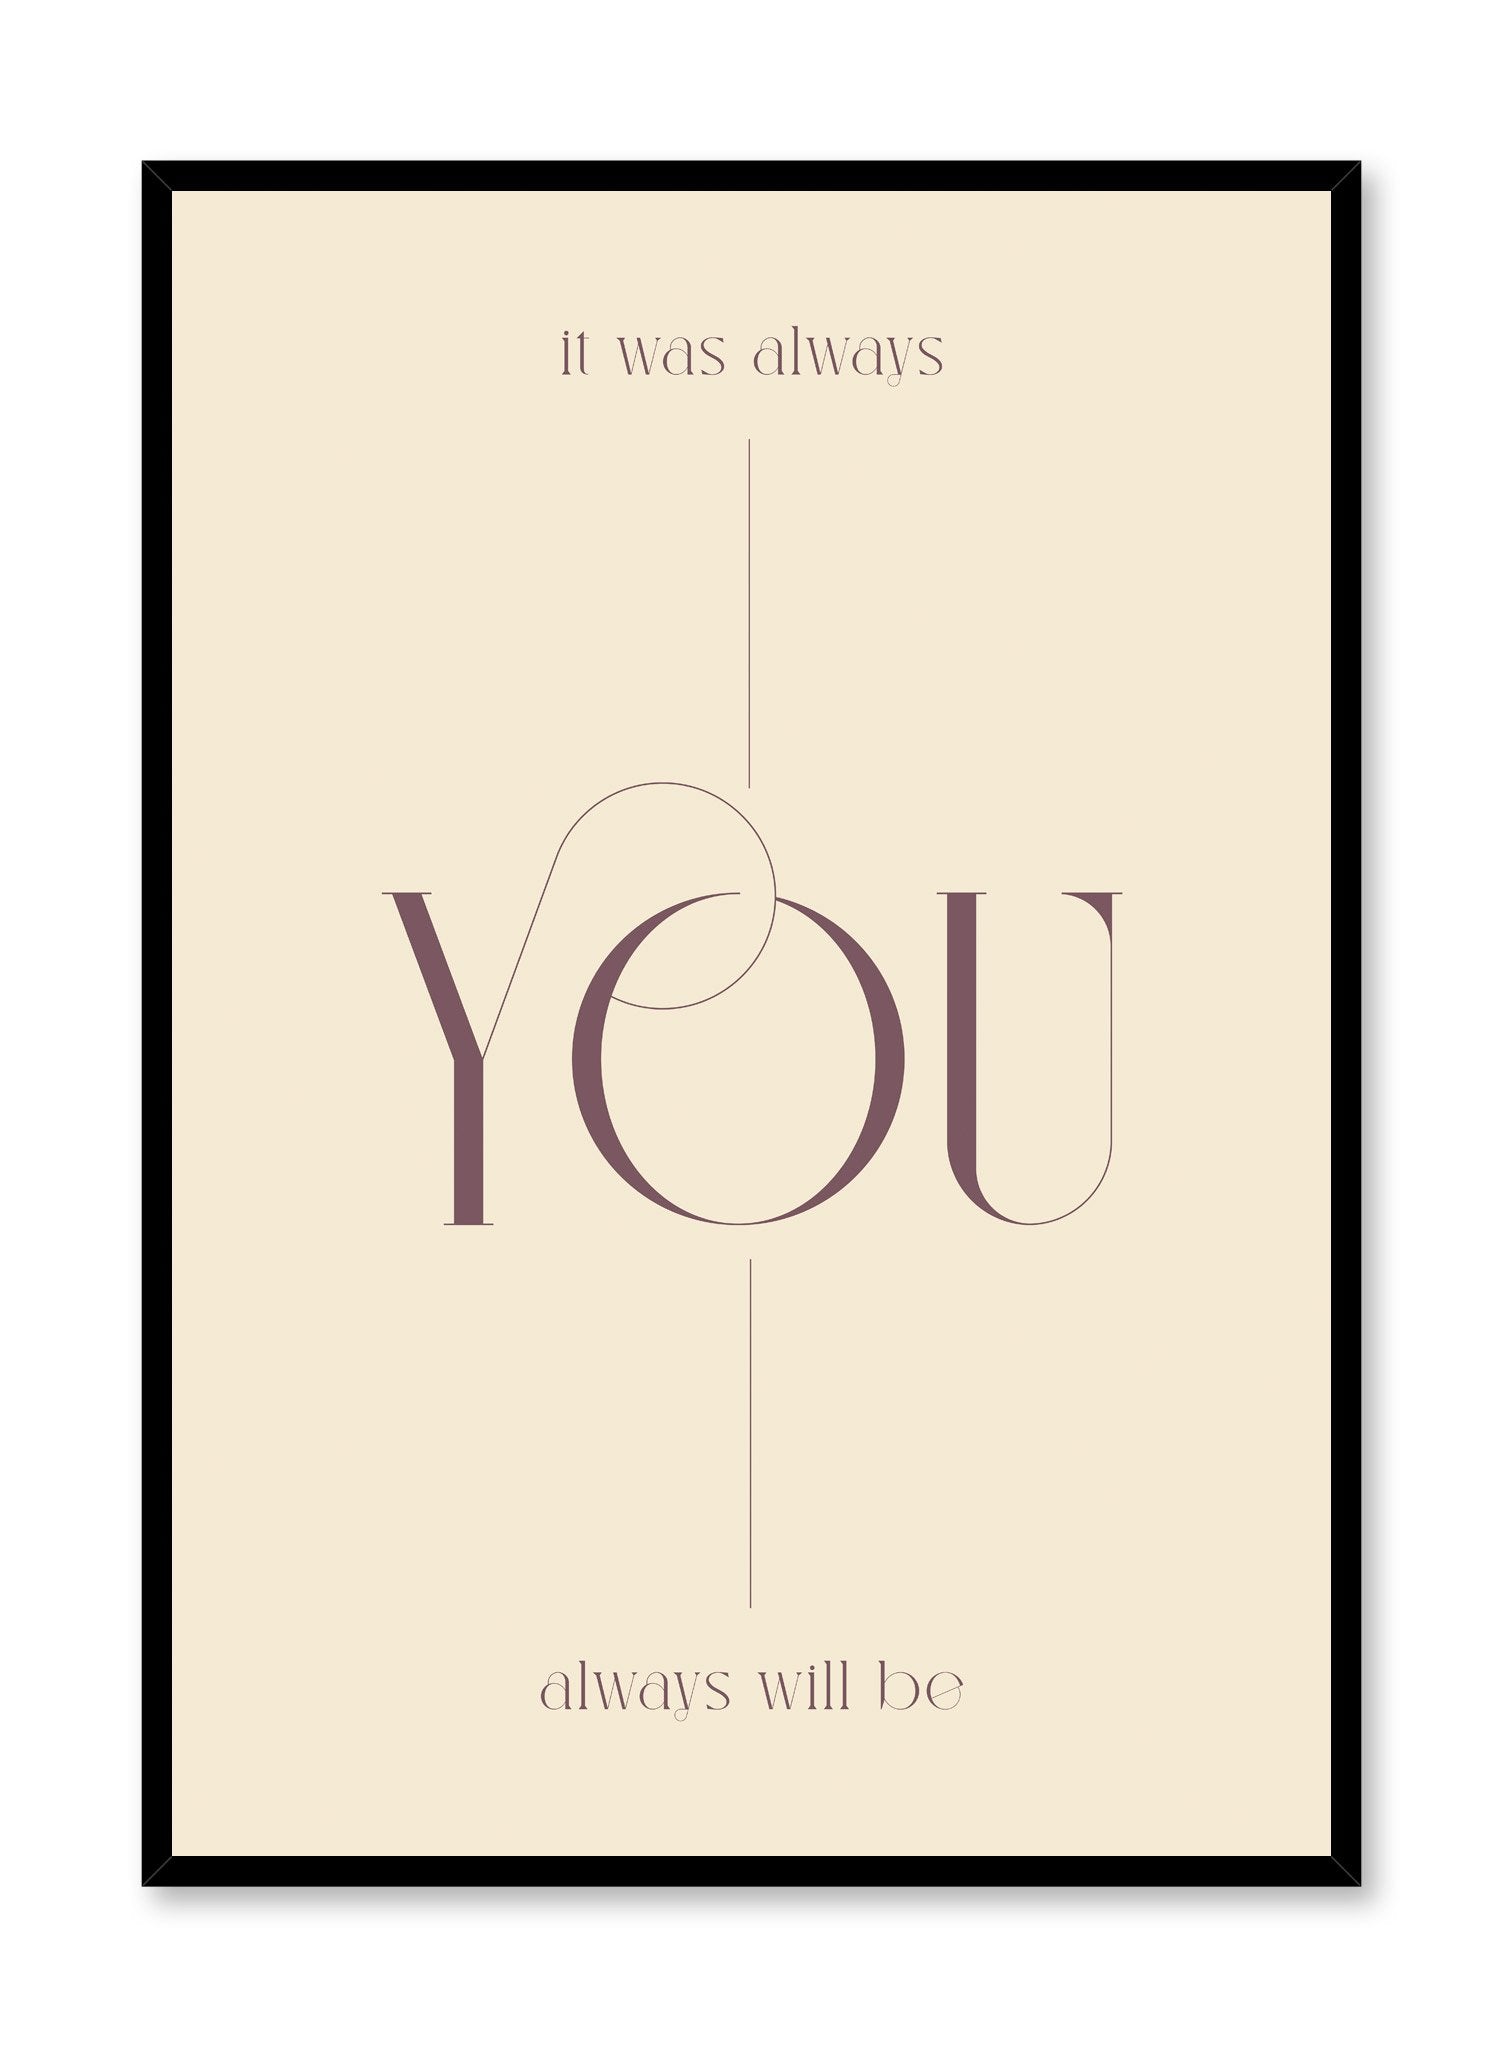 "It Was Always You in Beige" is a minimalist typography poster by Opposite Wall of the words “it was always you and always will be” over a light beige background in vintage lettering.